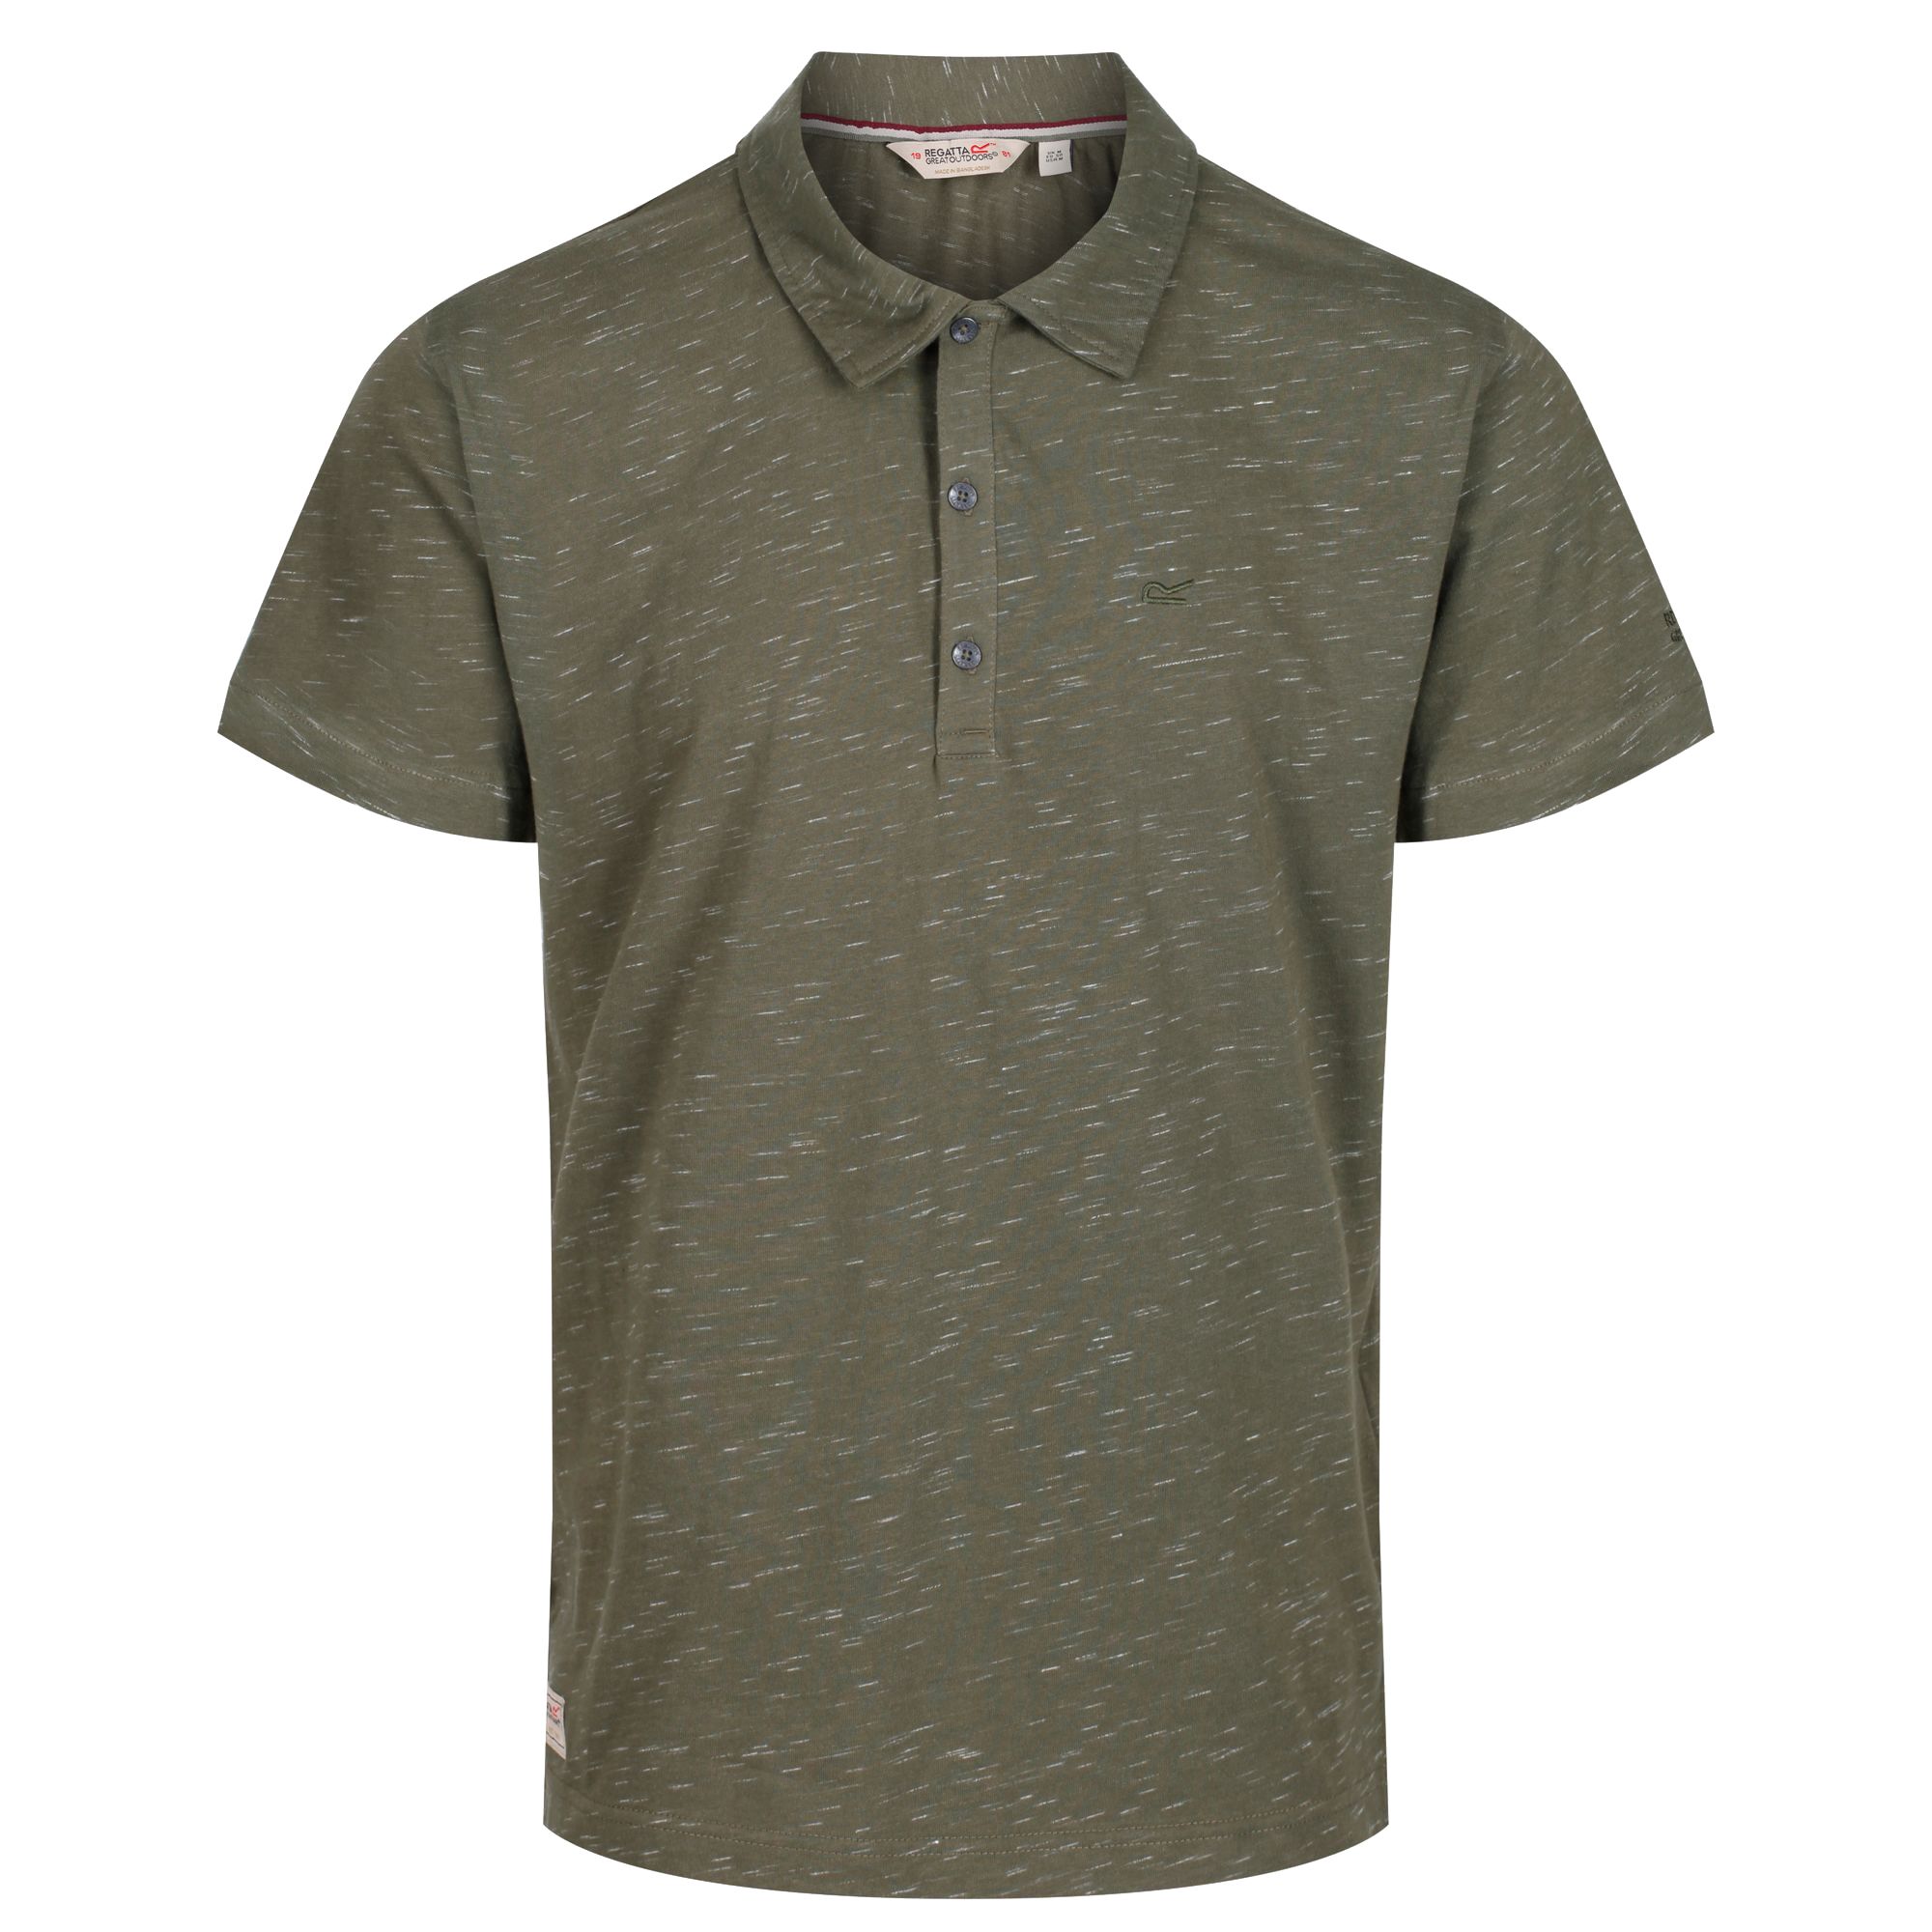 180gsm 100% Cool weave cotton with inject effect. 2 button placket with dyed to match branded Buttons. Polo neck style.